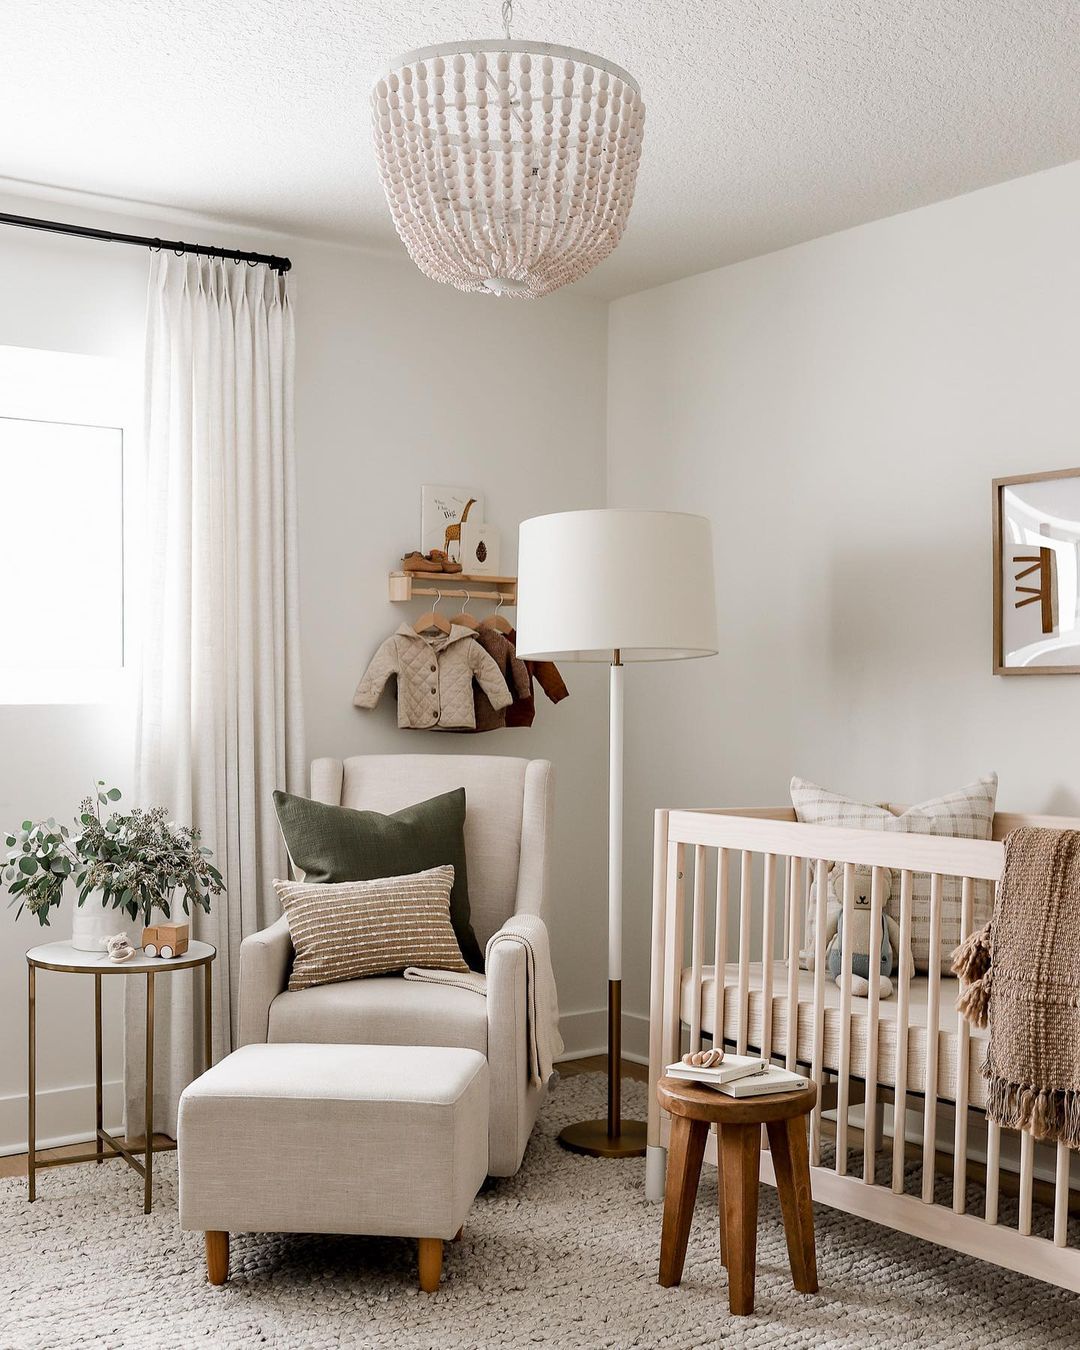 Neutral baby room with nursing chair and wooden stool. Photo by Instagram user @halfway_wholeistic